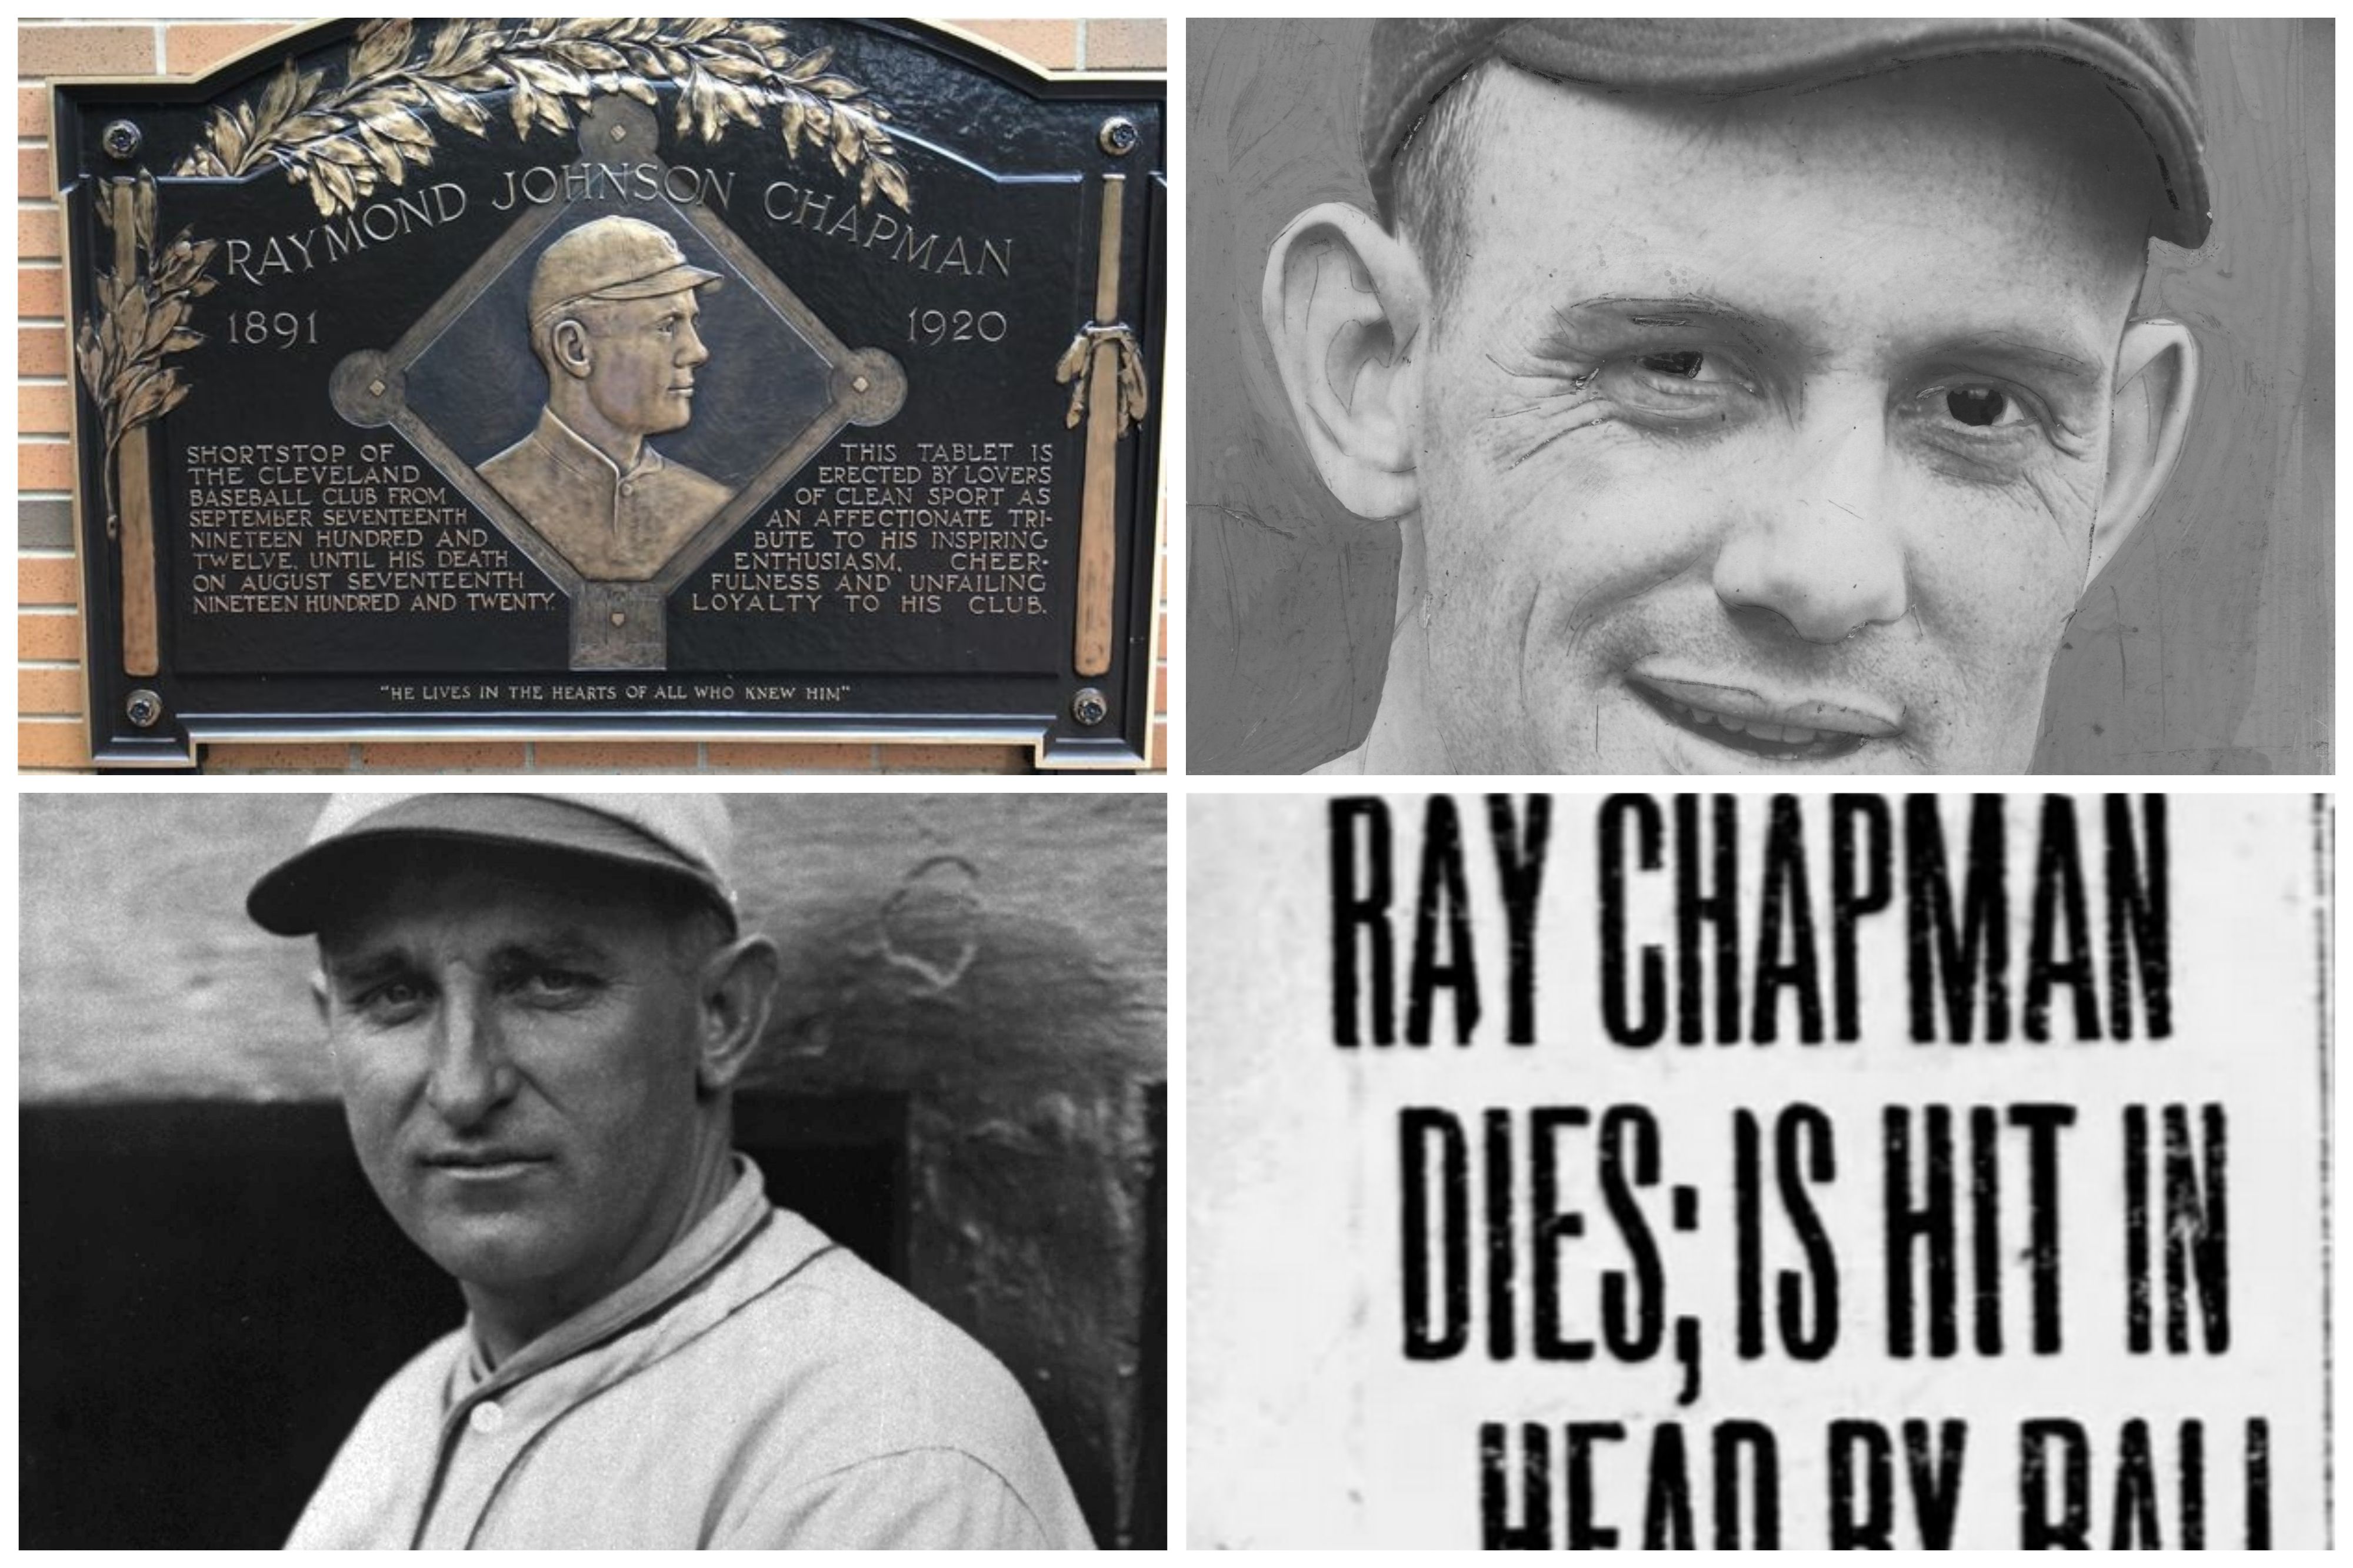 They Played In Color Galleries on X: OTD in 1920 tragedy strikes @ the  Polo Grounds as Cleveland star SS Ray Chapman, who was known to crowd the  plate, fails to get